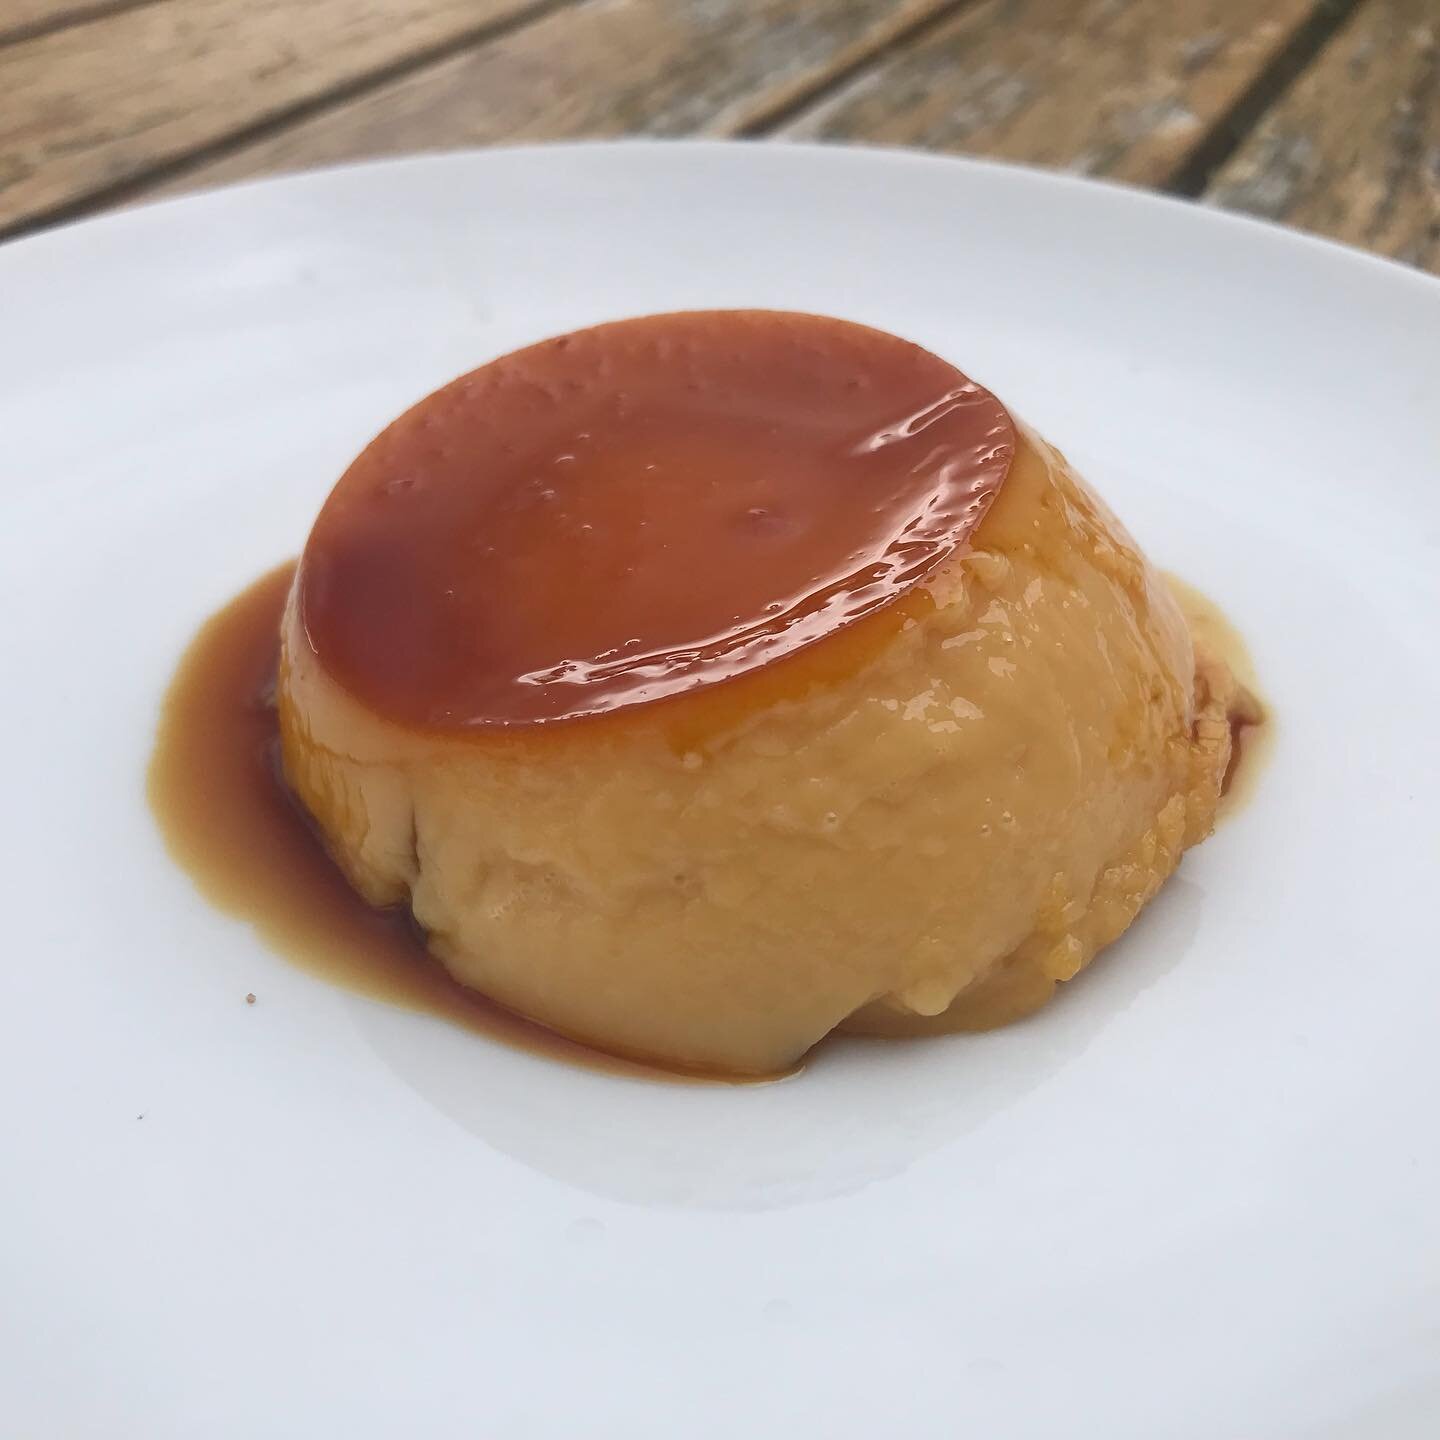 Test baking the Flan de Naranja for Official Competition, our Spanish night. Golly gosh these taste sensational, I heartily reccomend you give them a go. Stand-by for 120 shortly :-).
___
#littlelightningcinema #popupcinema #southdownsnp #spanishfood